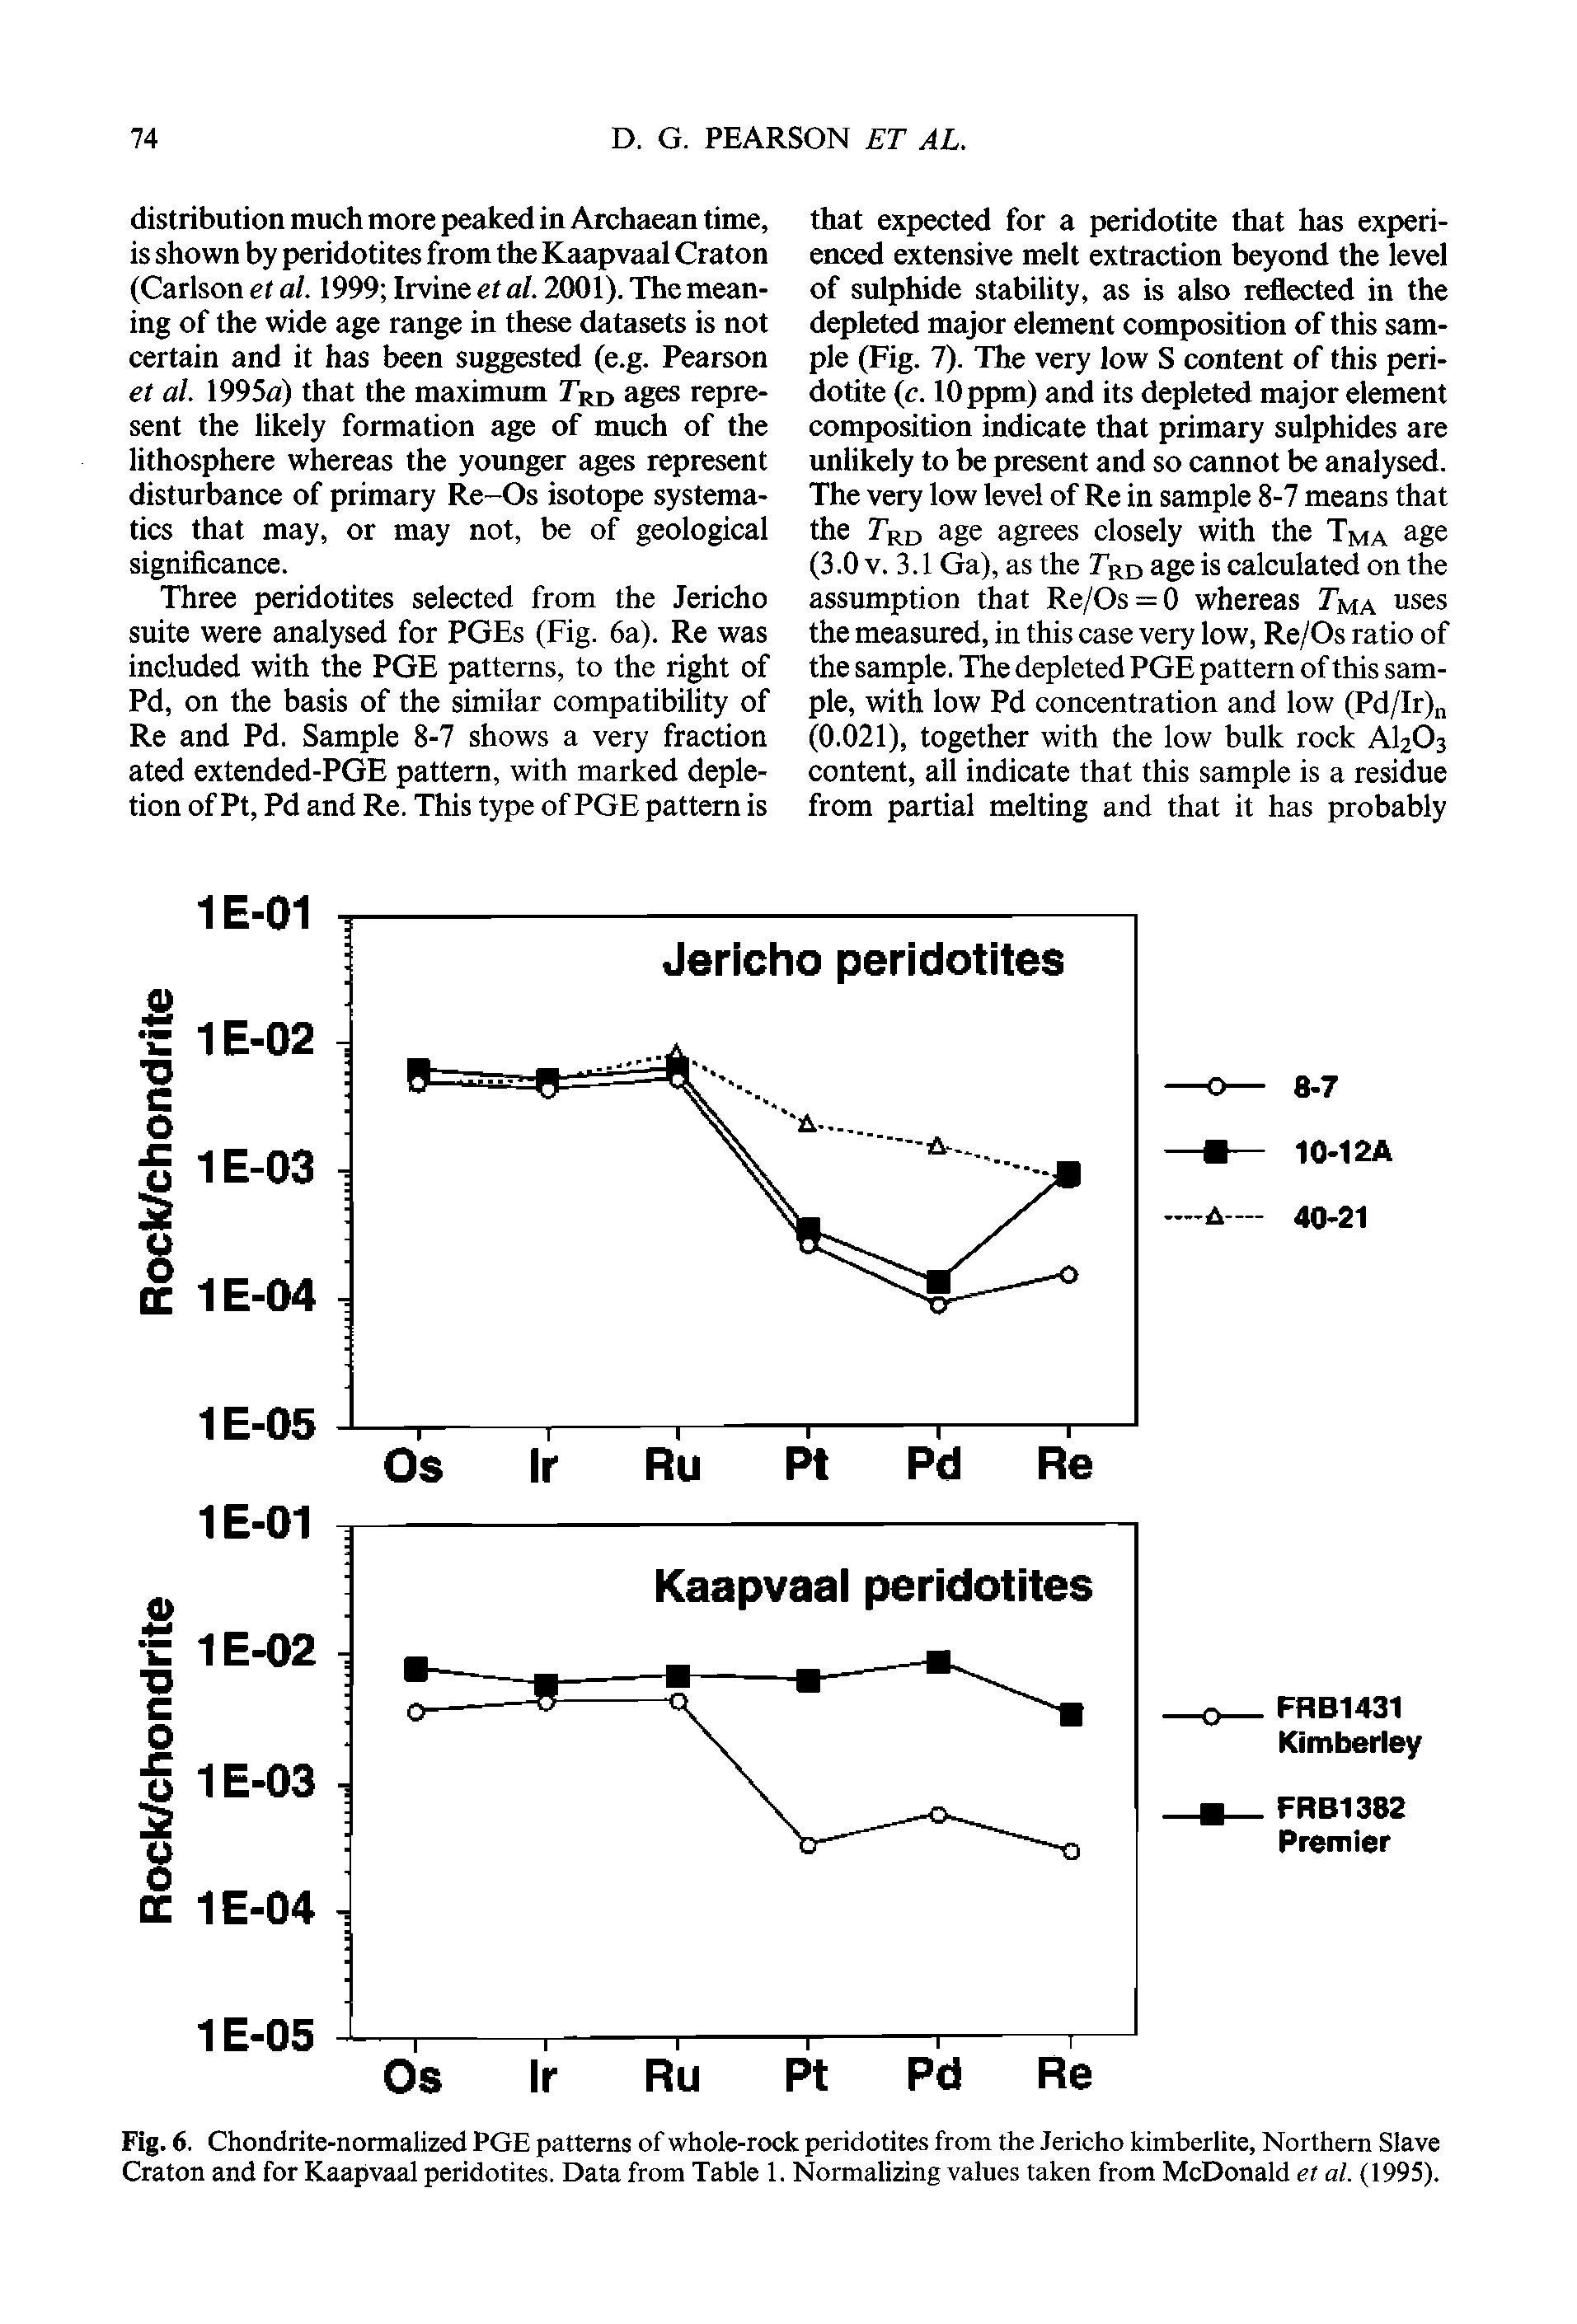 Fig. 6. Chondrite-normalized PGE patterns of whole-rock peridotites from the Jericho kimberlite. Northern Slave Craton and for Kaapvaal peridotites. Data from Table 1. Normalizing values taken from McDonald et al. (1995).